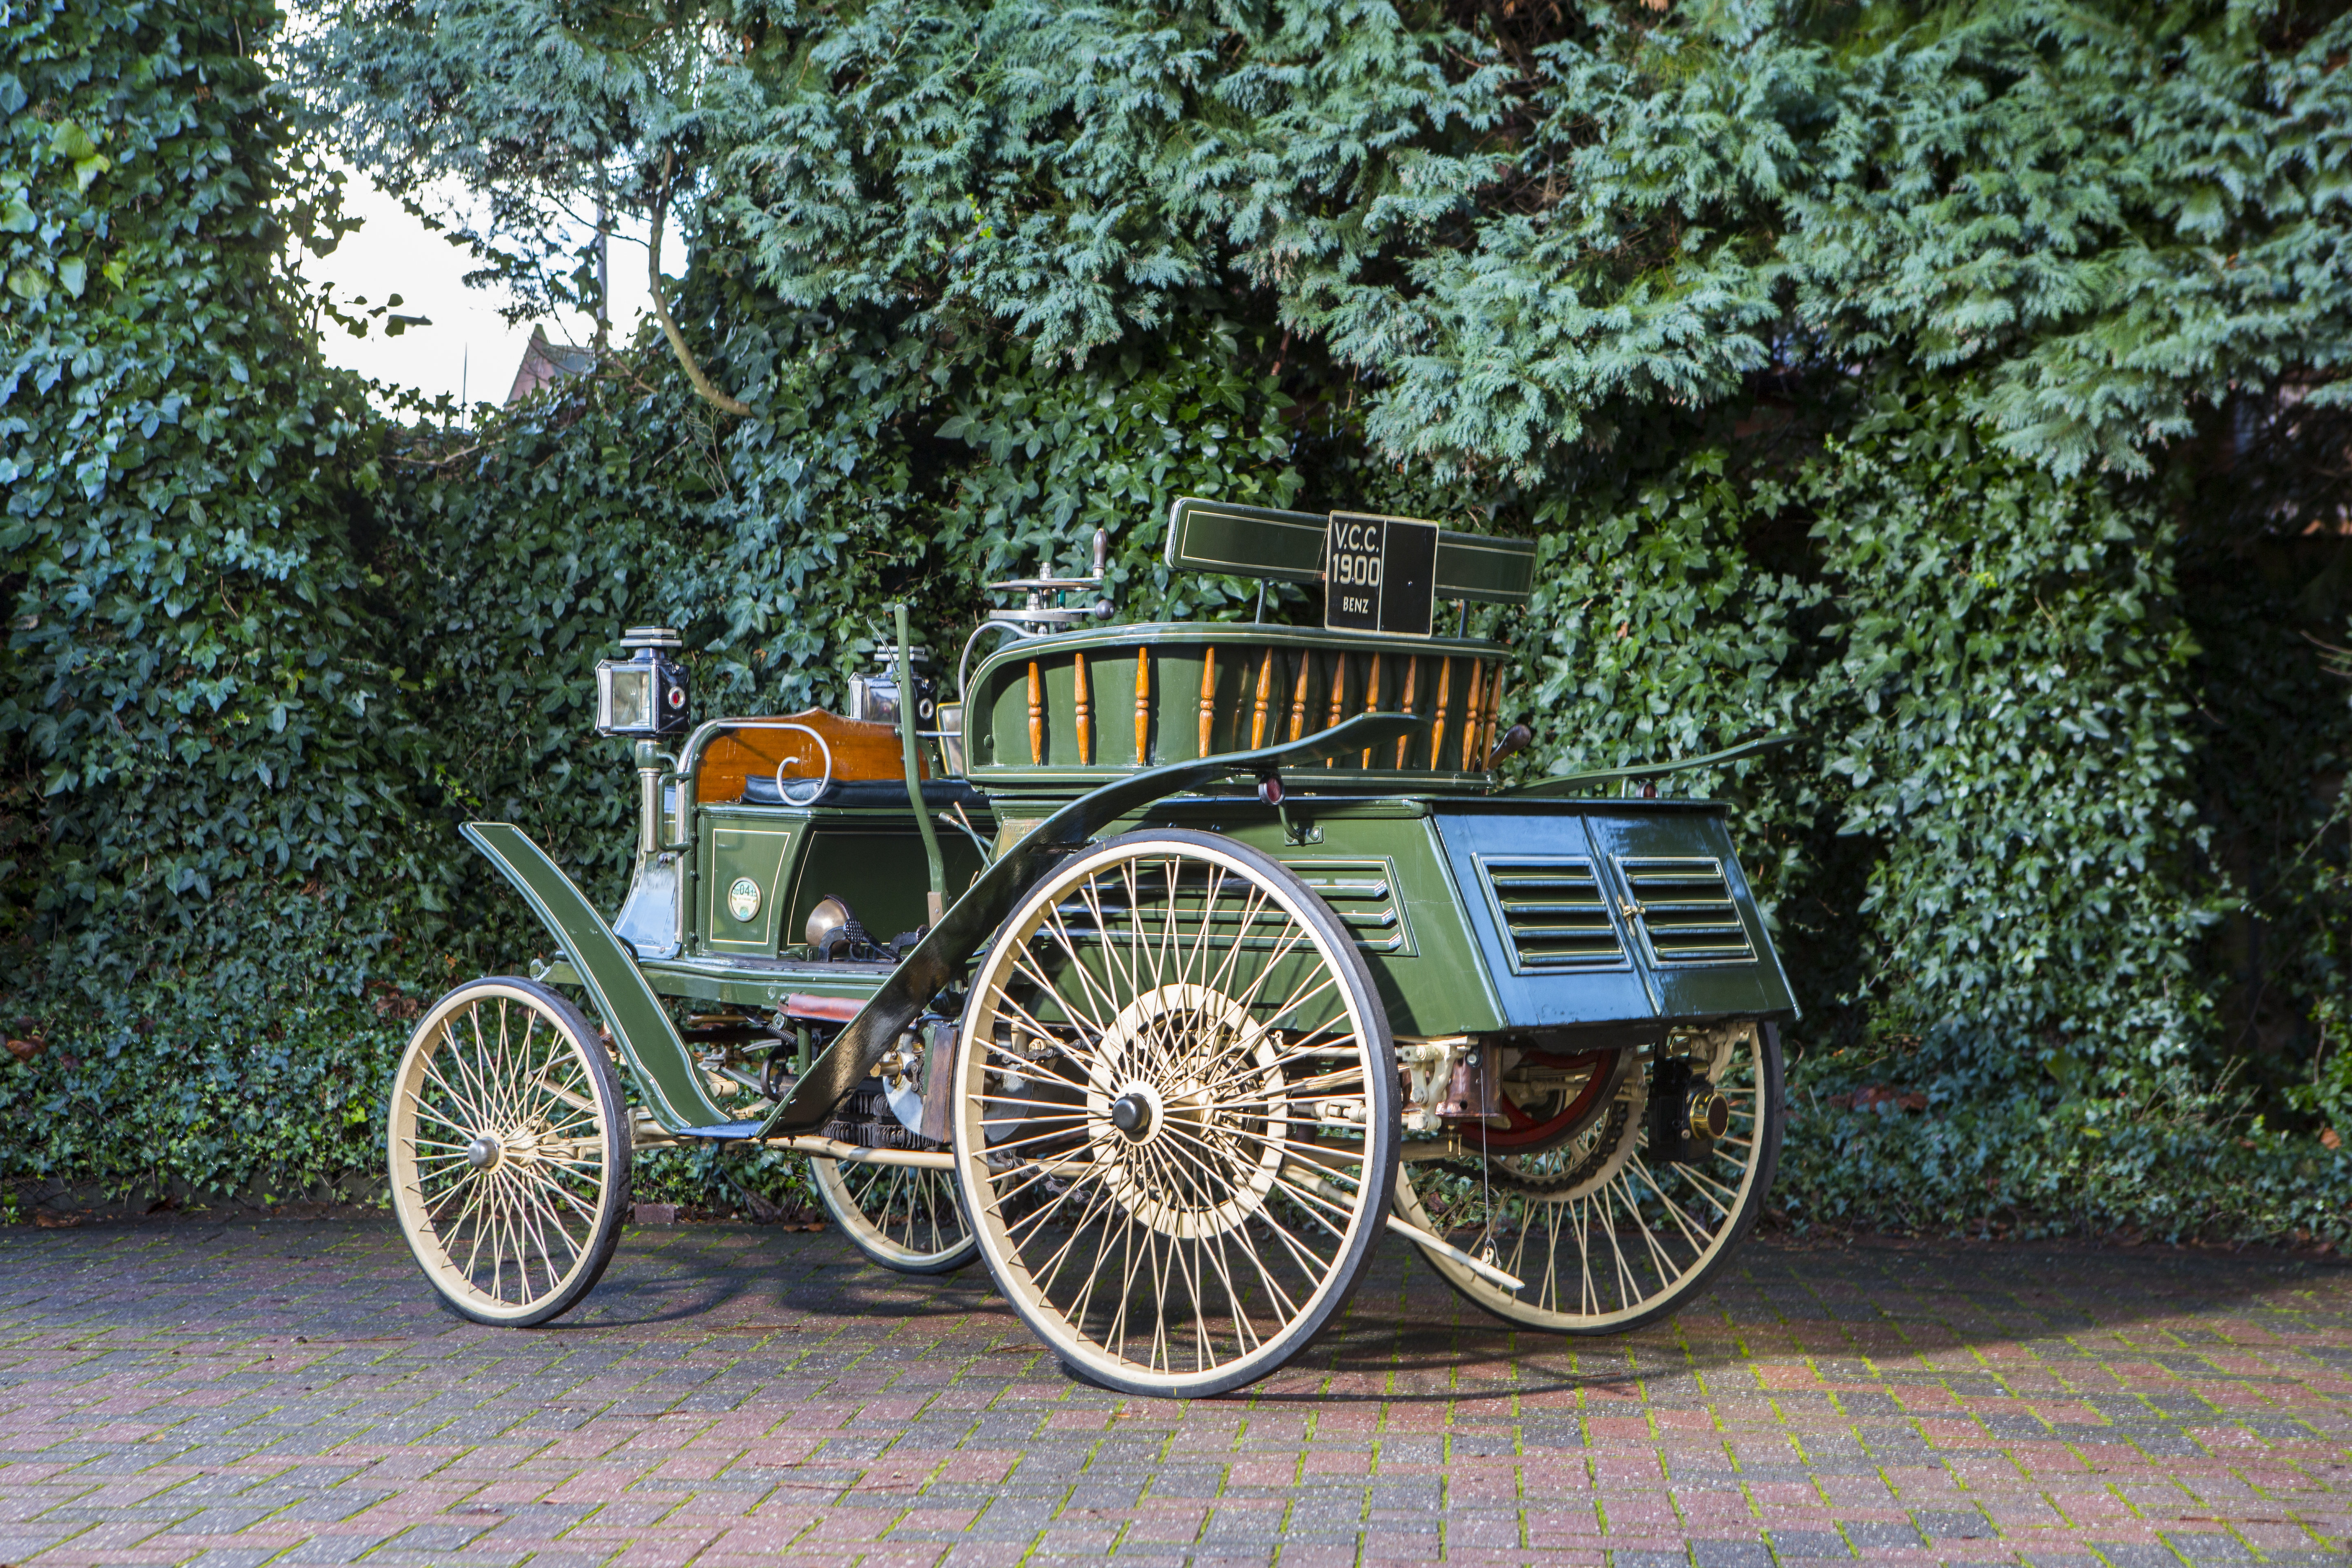 115-YEAR-OLD BENZ IDEAL OFFERED AT BONHAMS MERCEDES-BENZ SALE cover